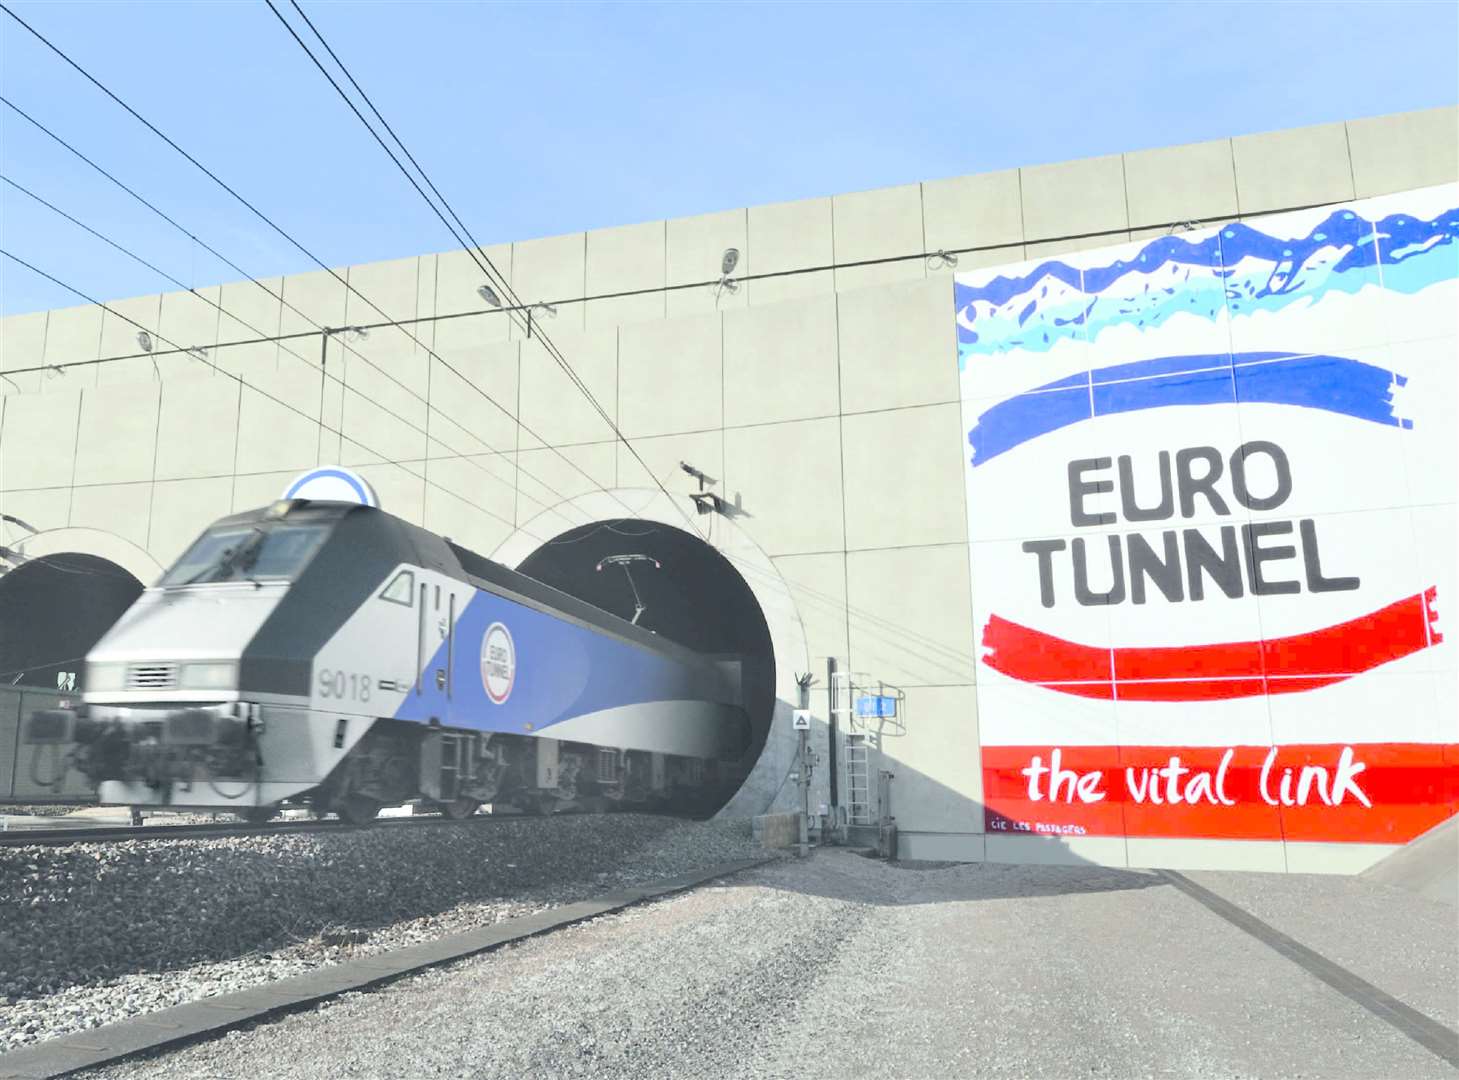 Eurotunnel has been hit hard by the pandemic and the travel restrictions which come with it